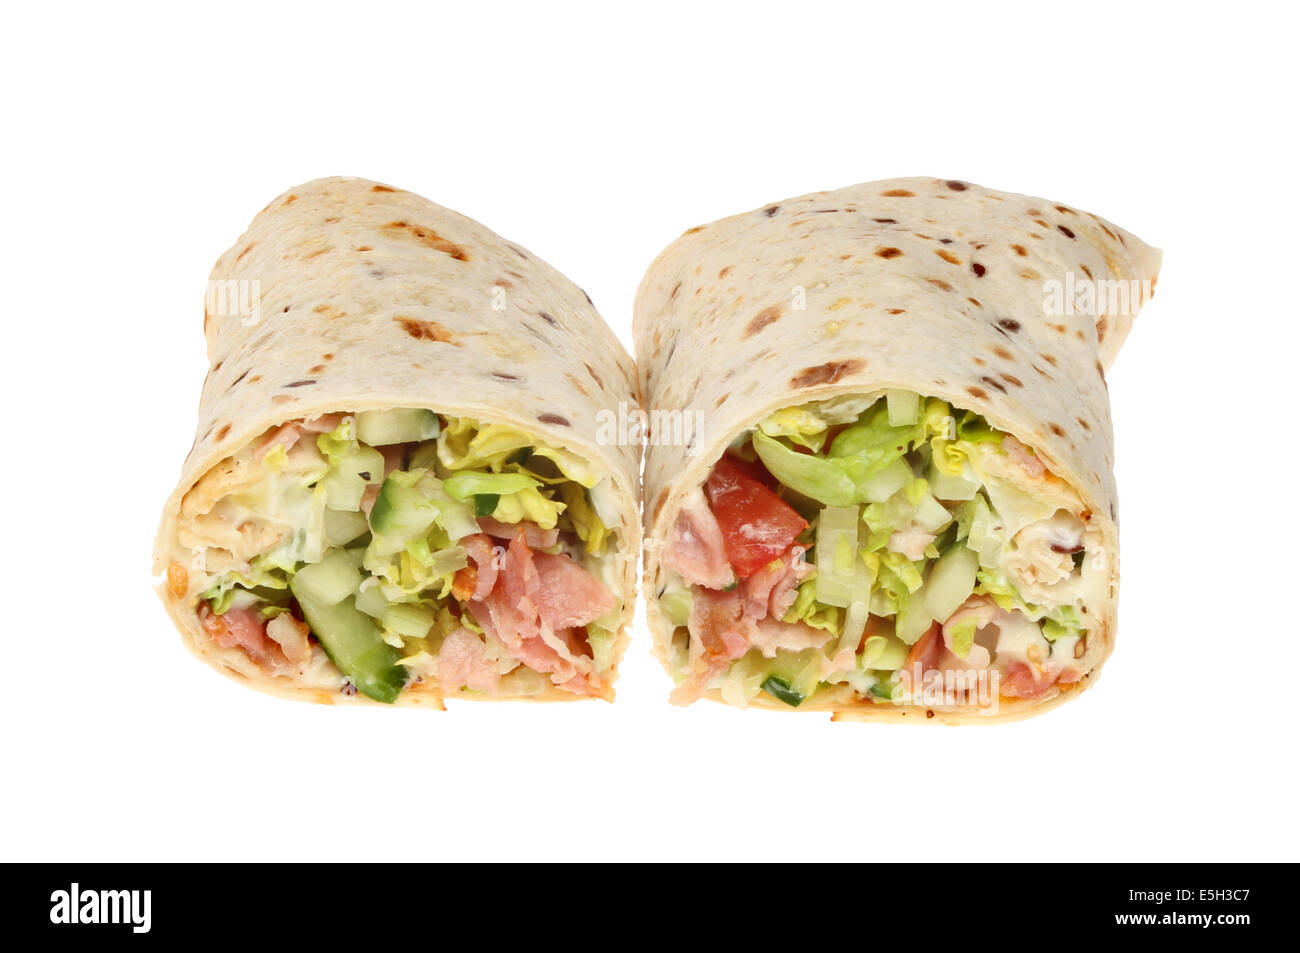 Bacon and salad bread wraps isolated against white Stock Photo